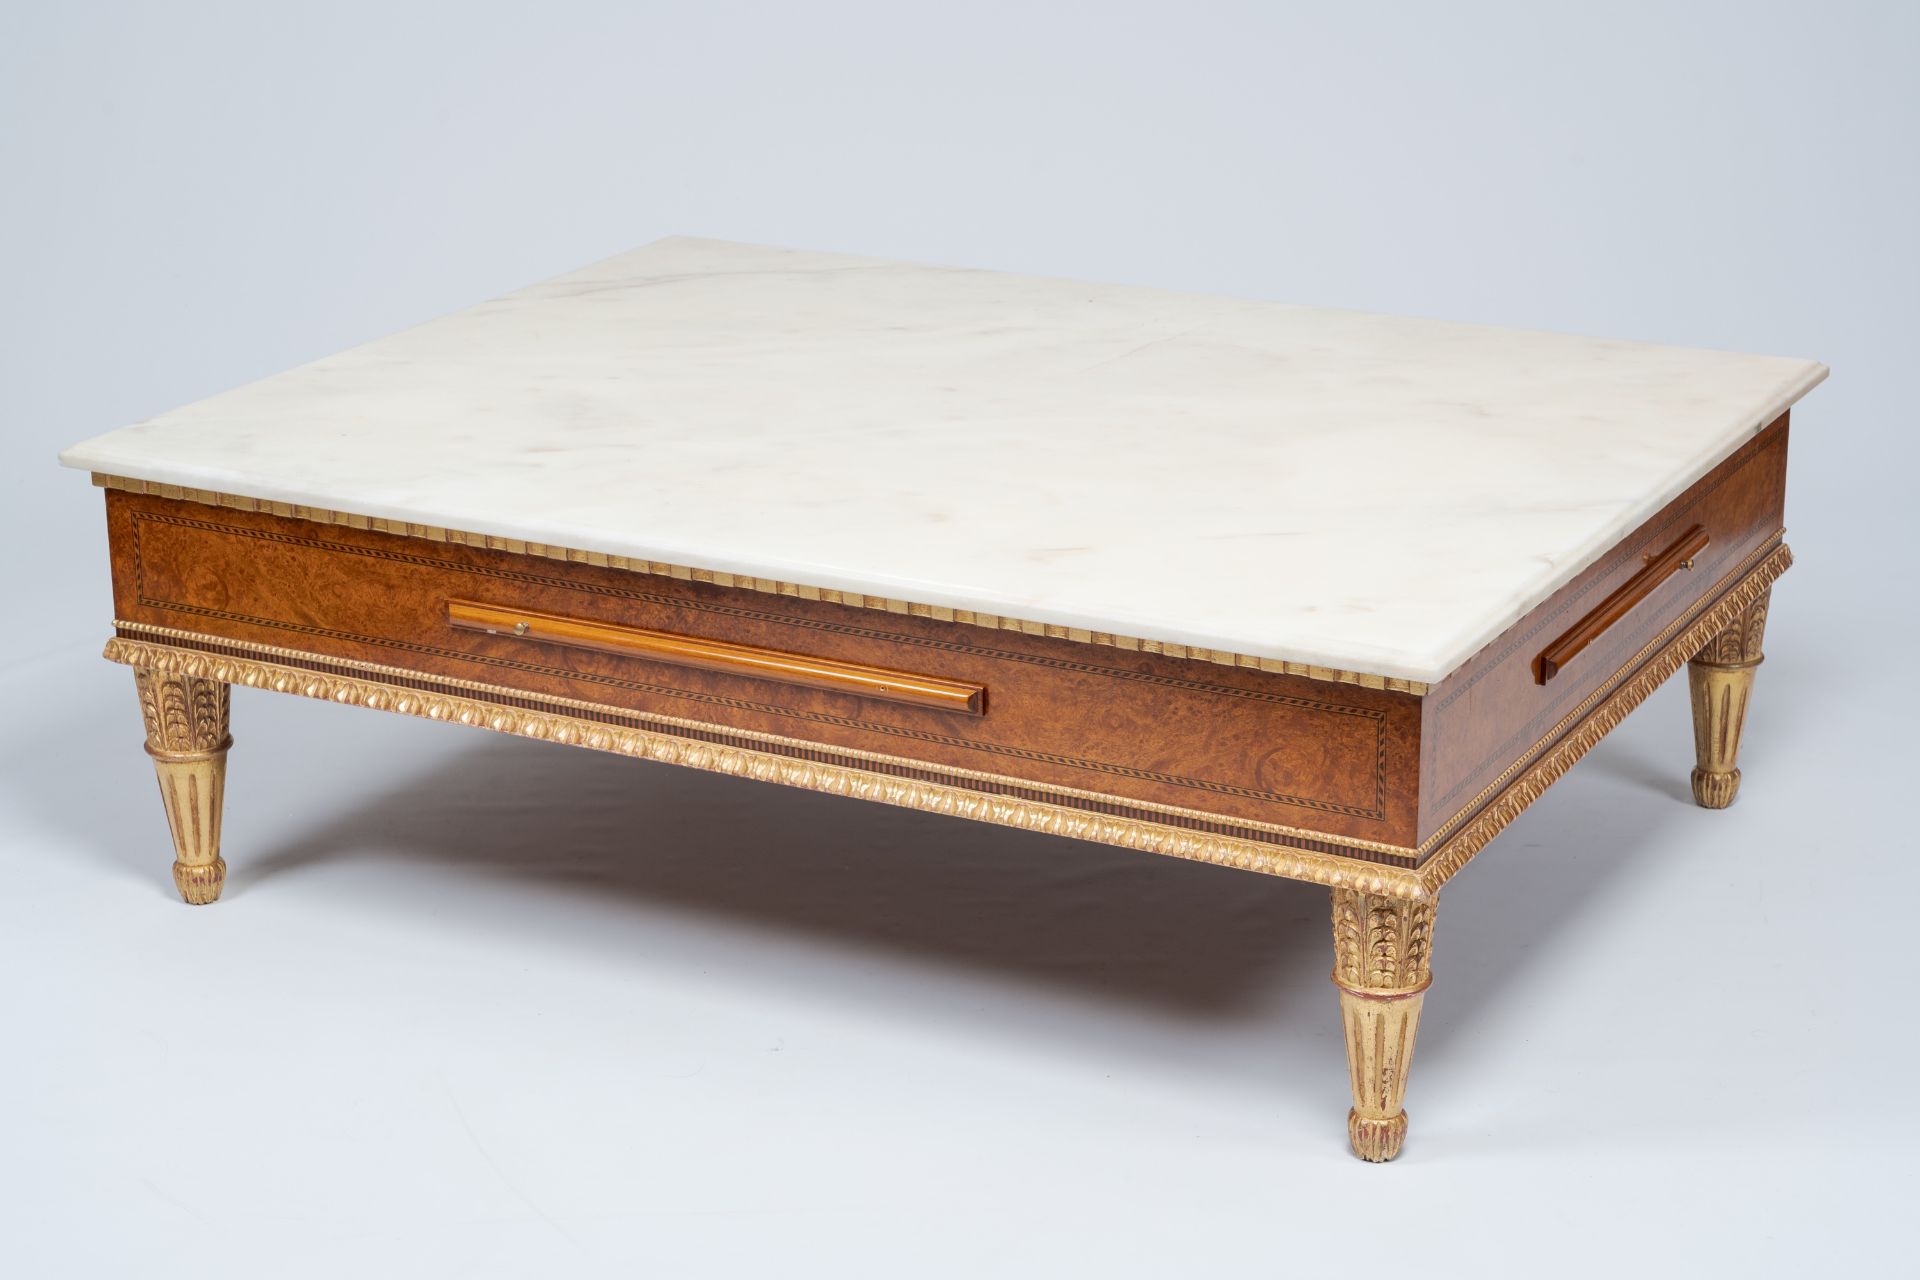 A Neoclassical partly gilt wood coffee table with marble top and four extendable plateaus, 20th C.